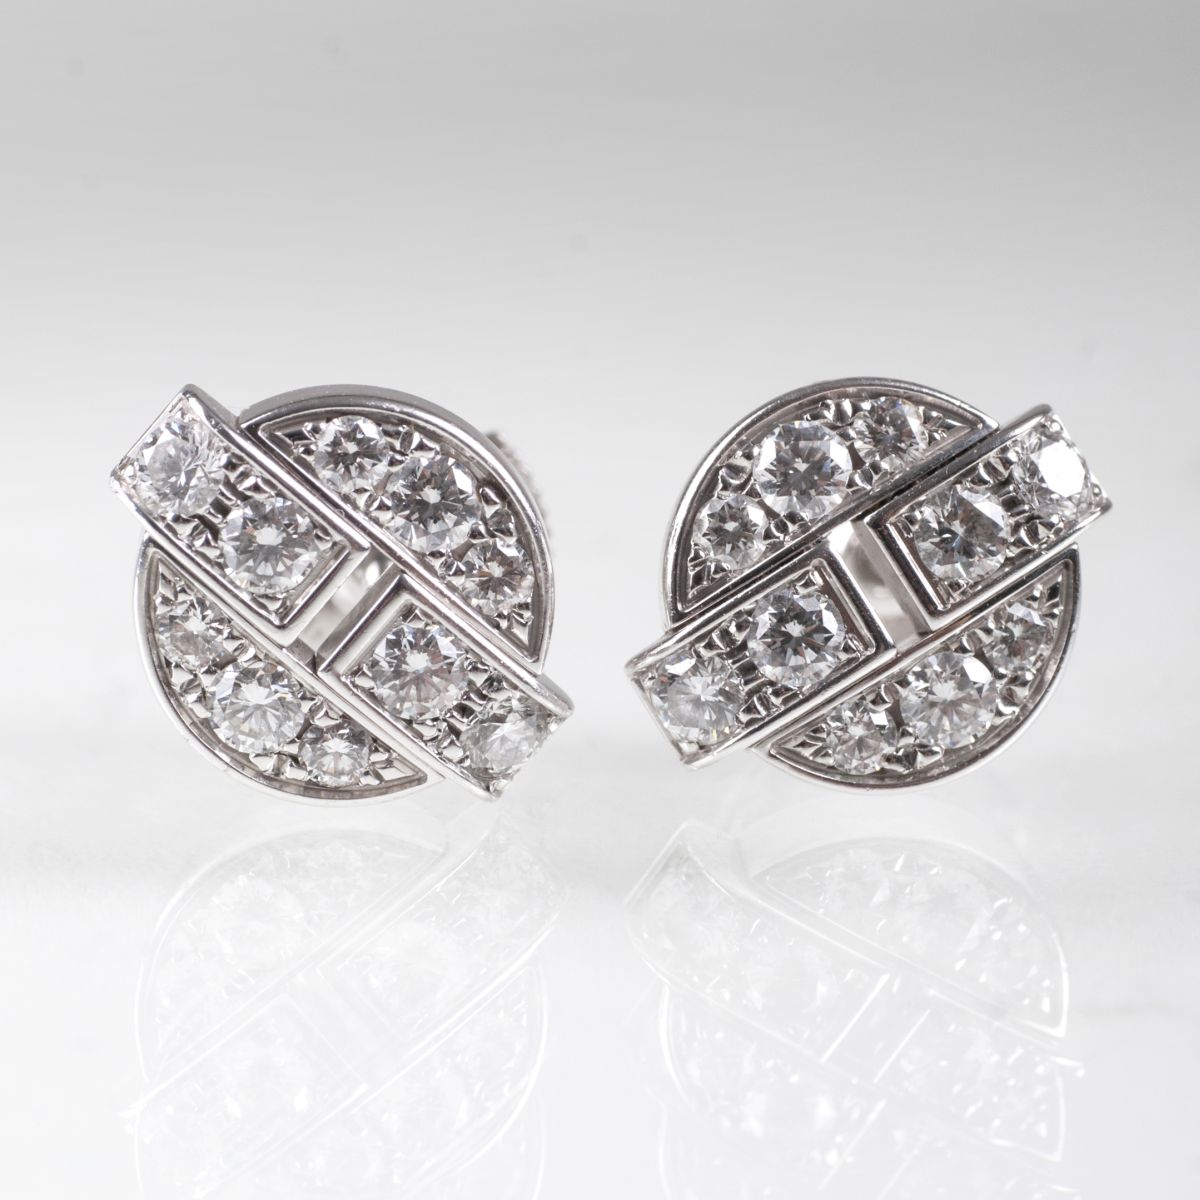 A pair of diamond earstuds by Cartier